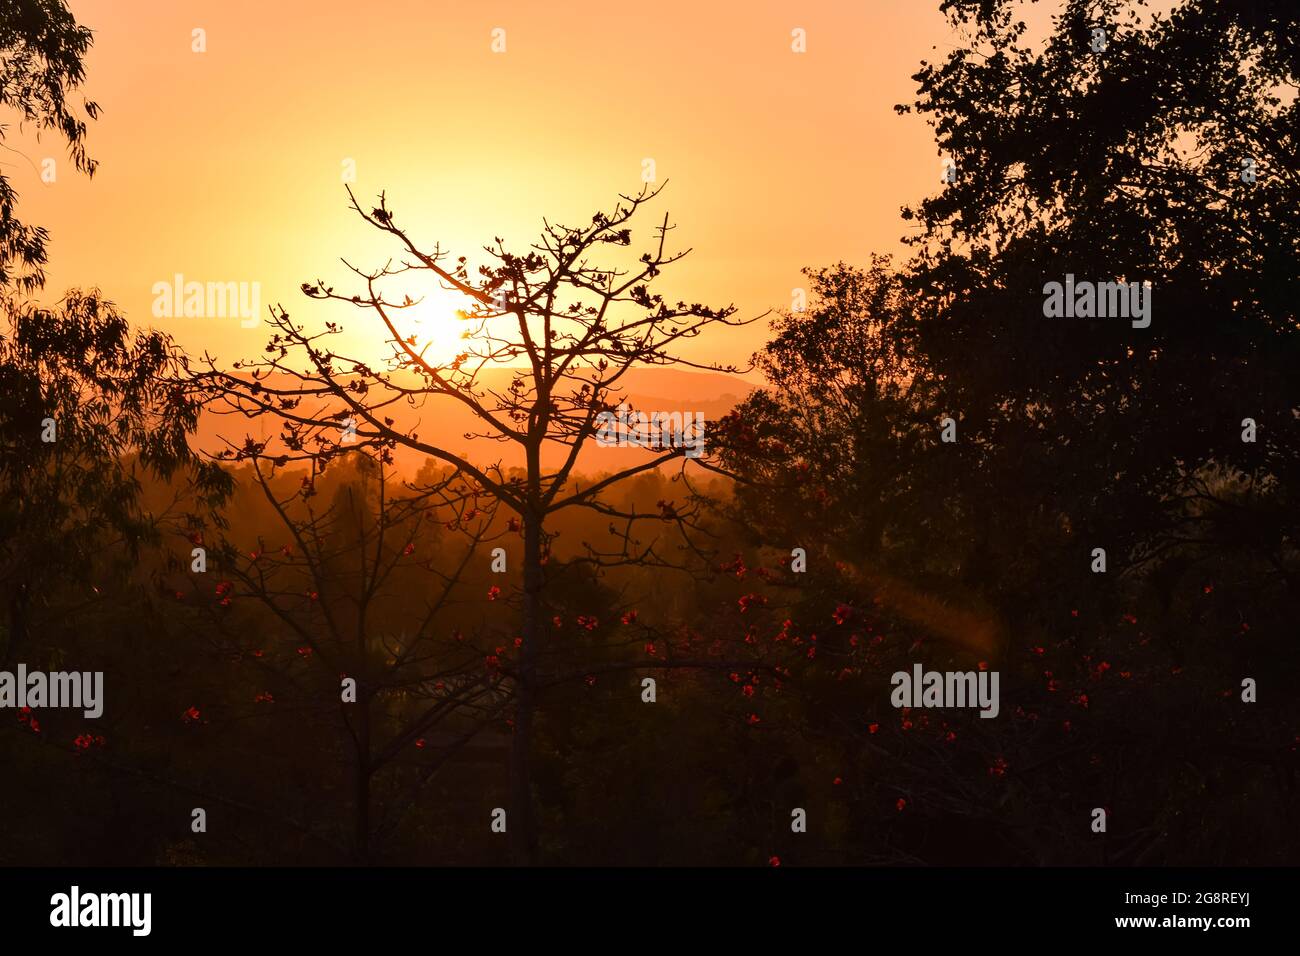 Beautiful orange yellow colored clear sky during the evening with sun and silhouette of many trees with flowers. Stock Photo